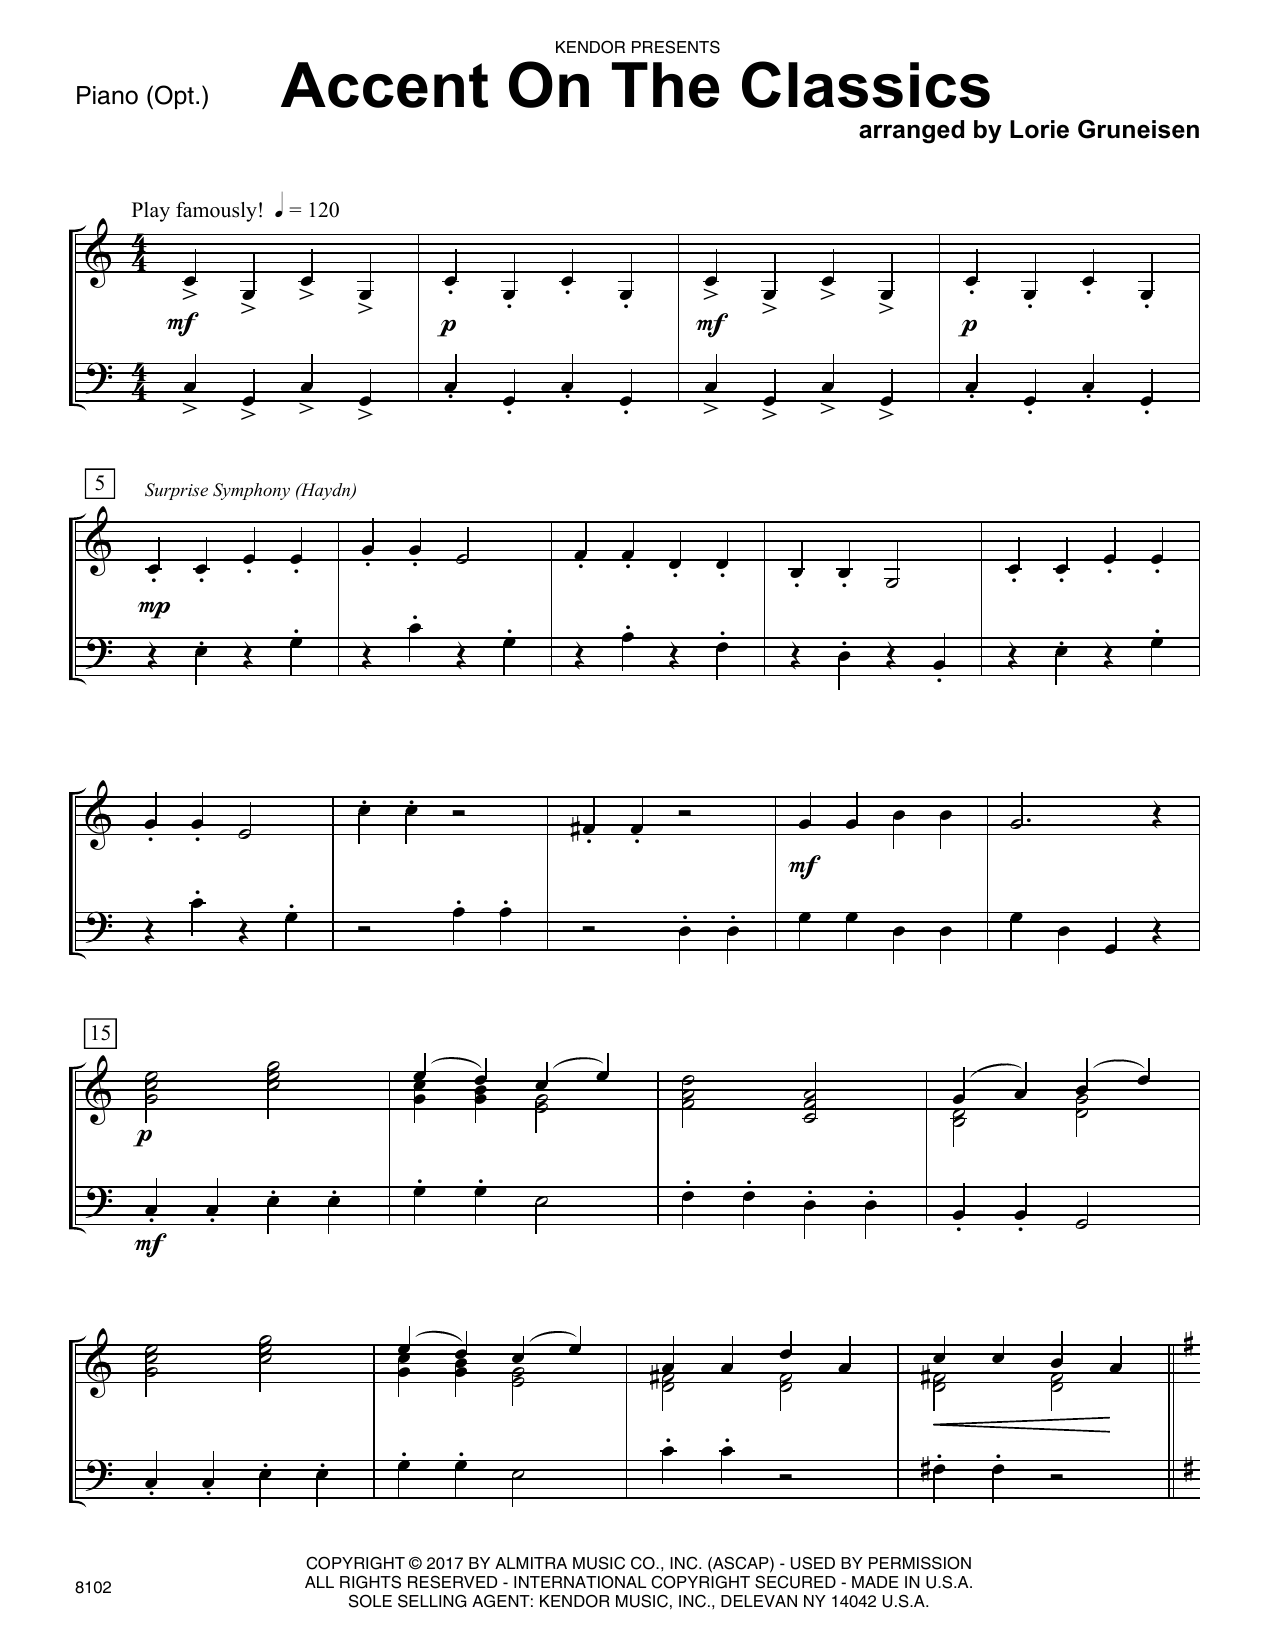 Download Lorie Gruneisen Accent On The Classics - Piano Accompan Sheet Music